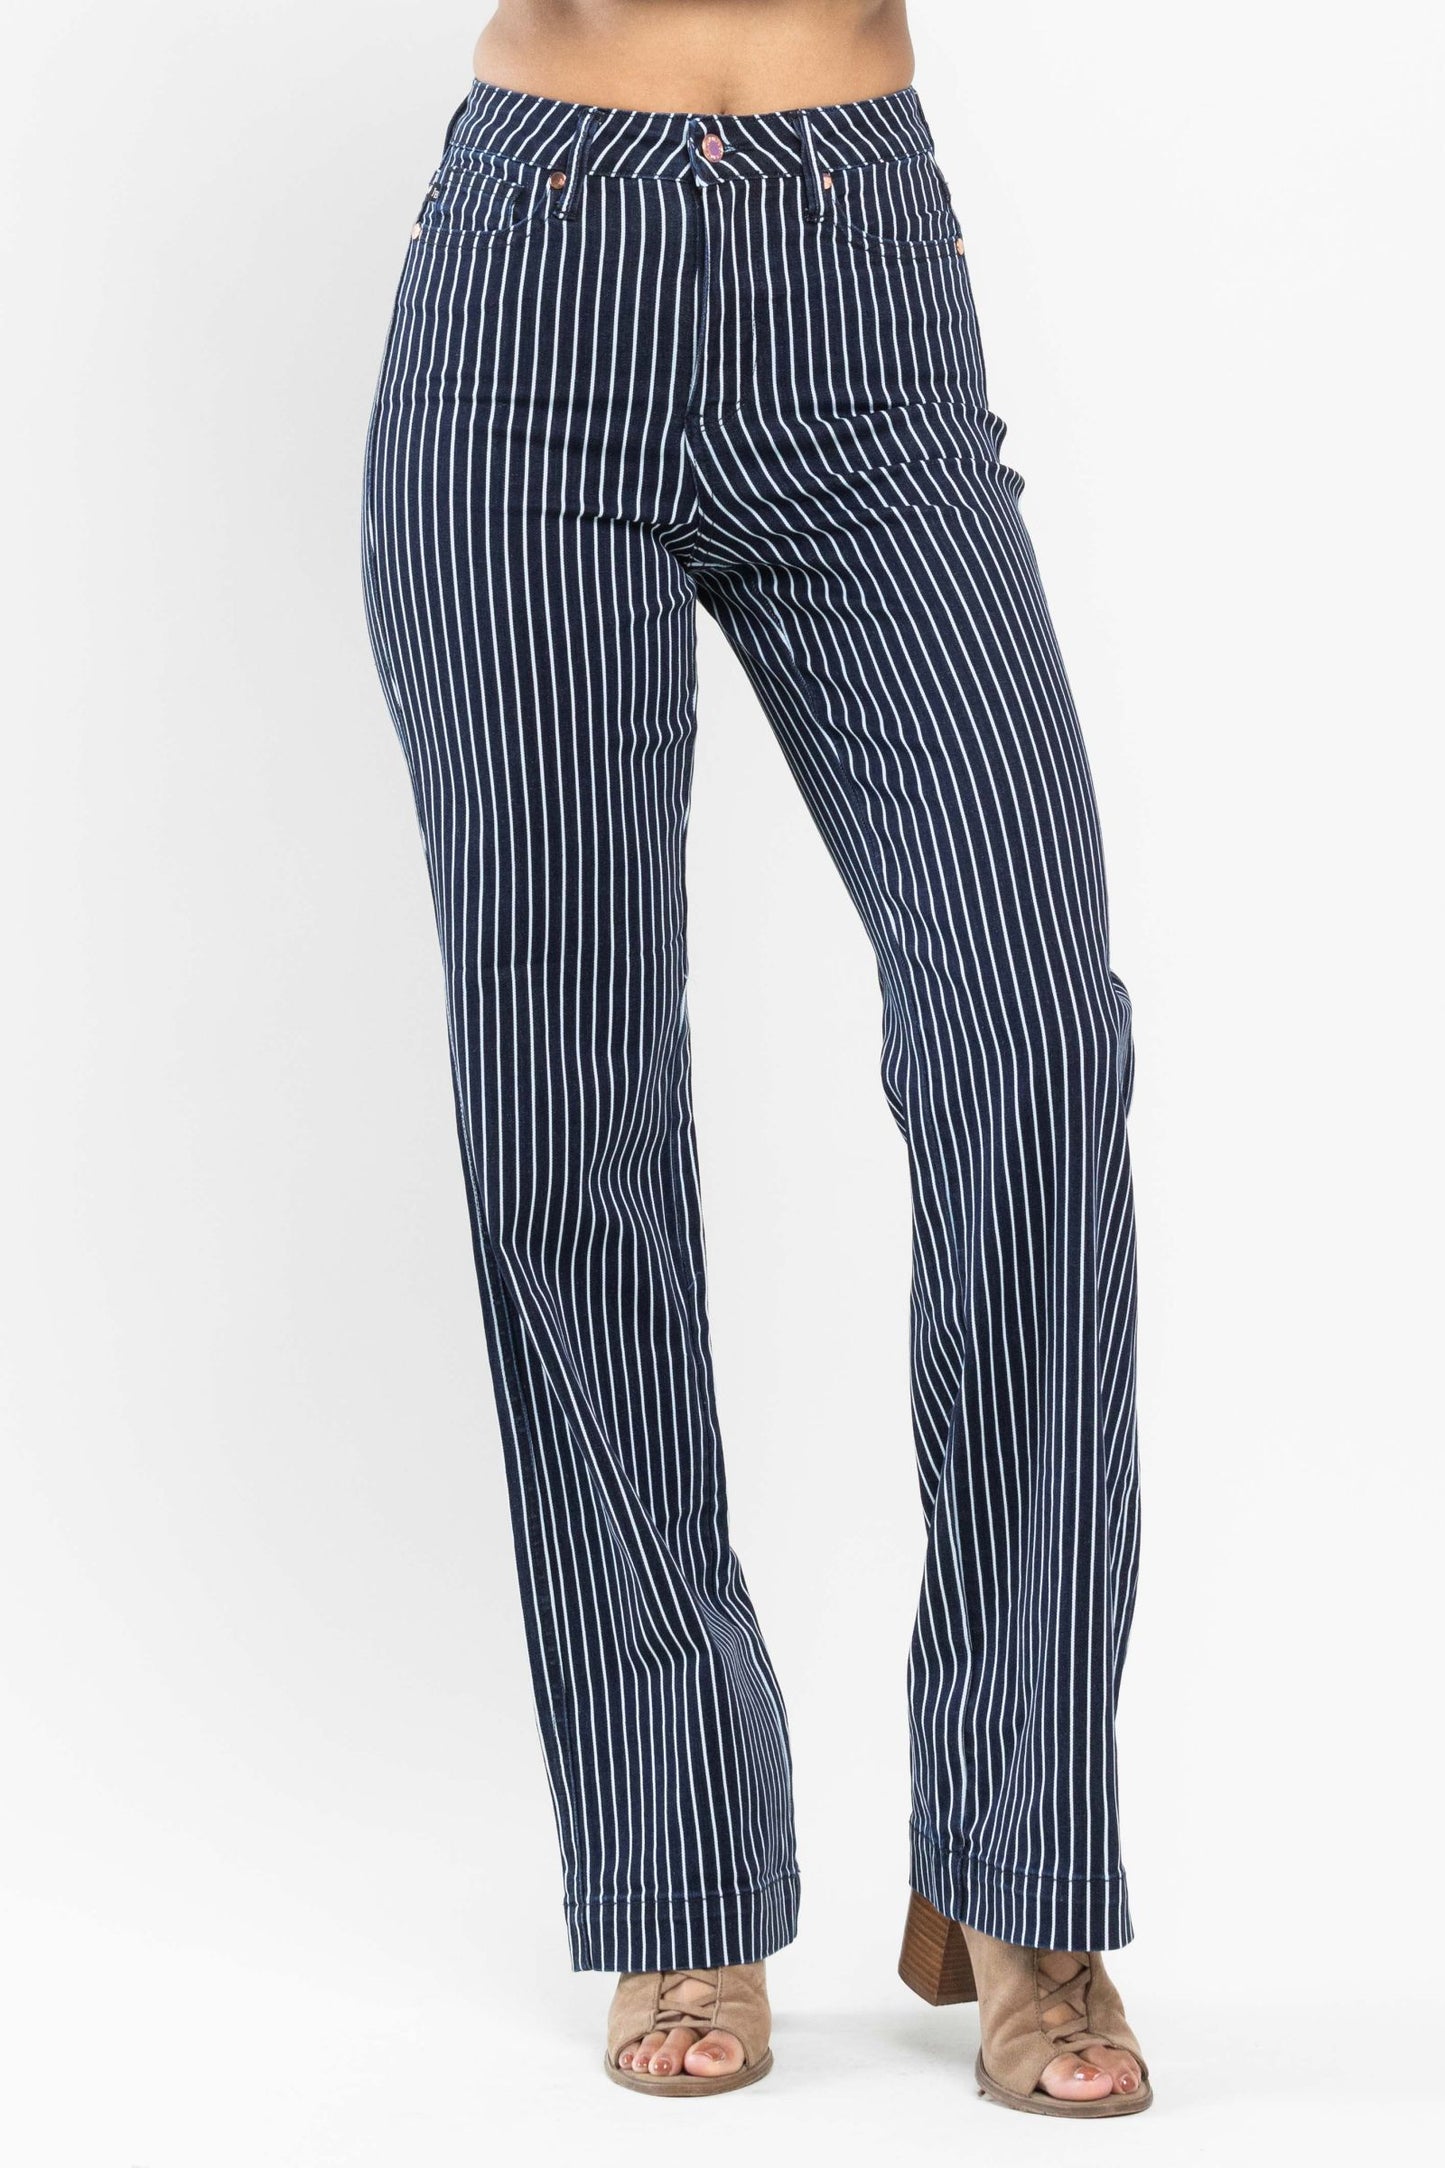 Arriving 10/3 - PreOrder - Judy Blue High Waist Tummy Control Striped Straight Jeans